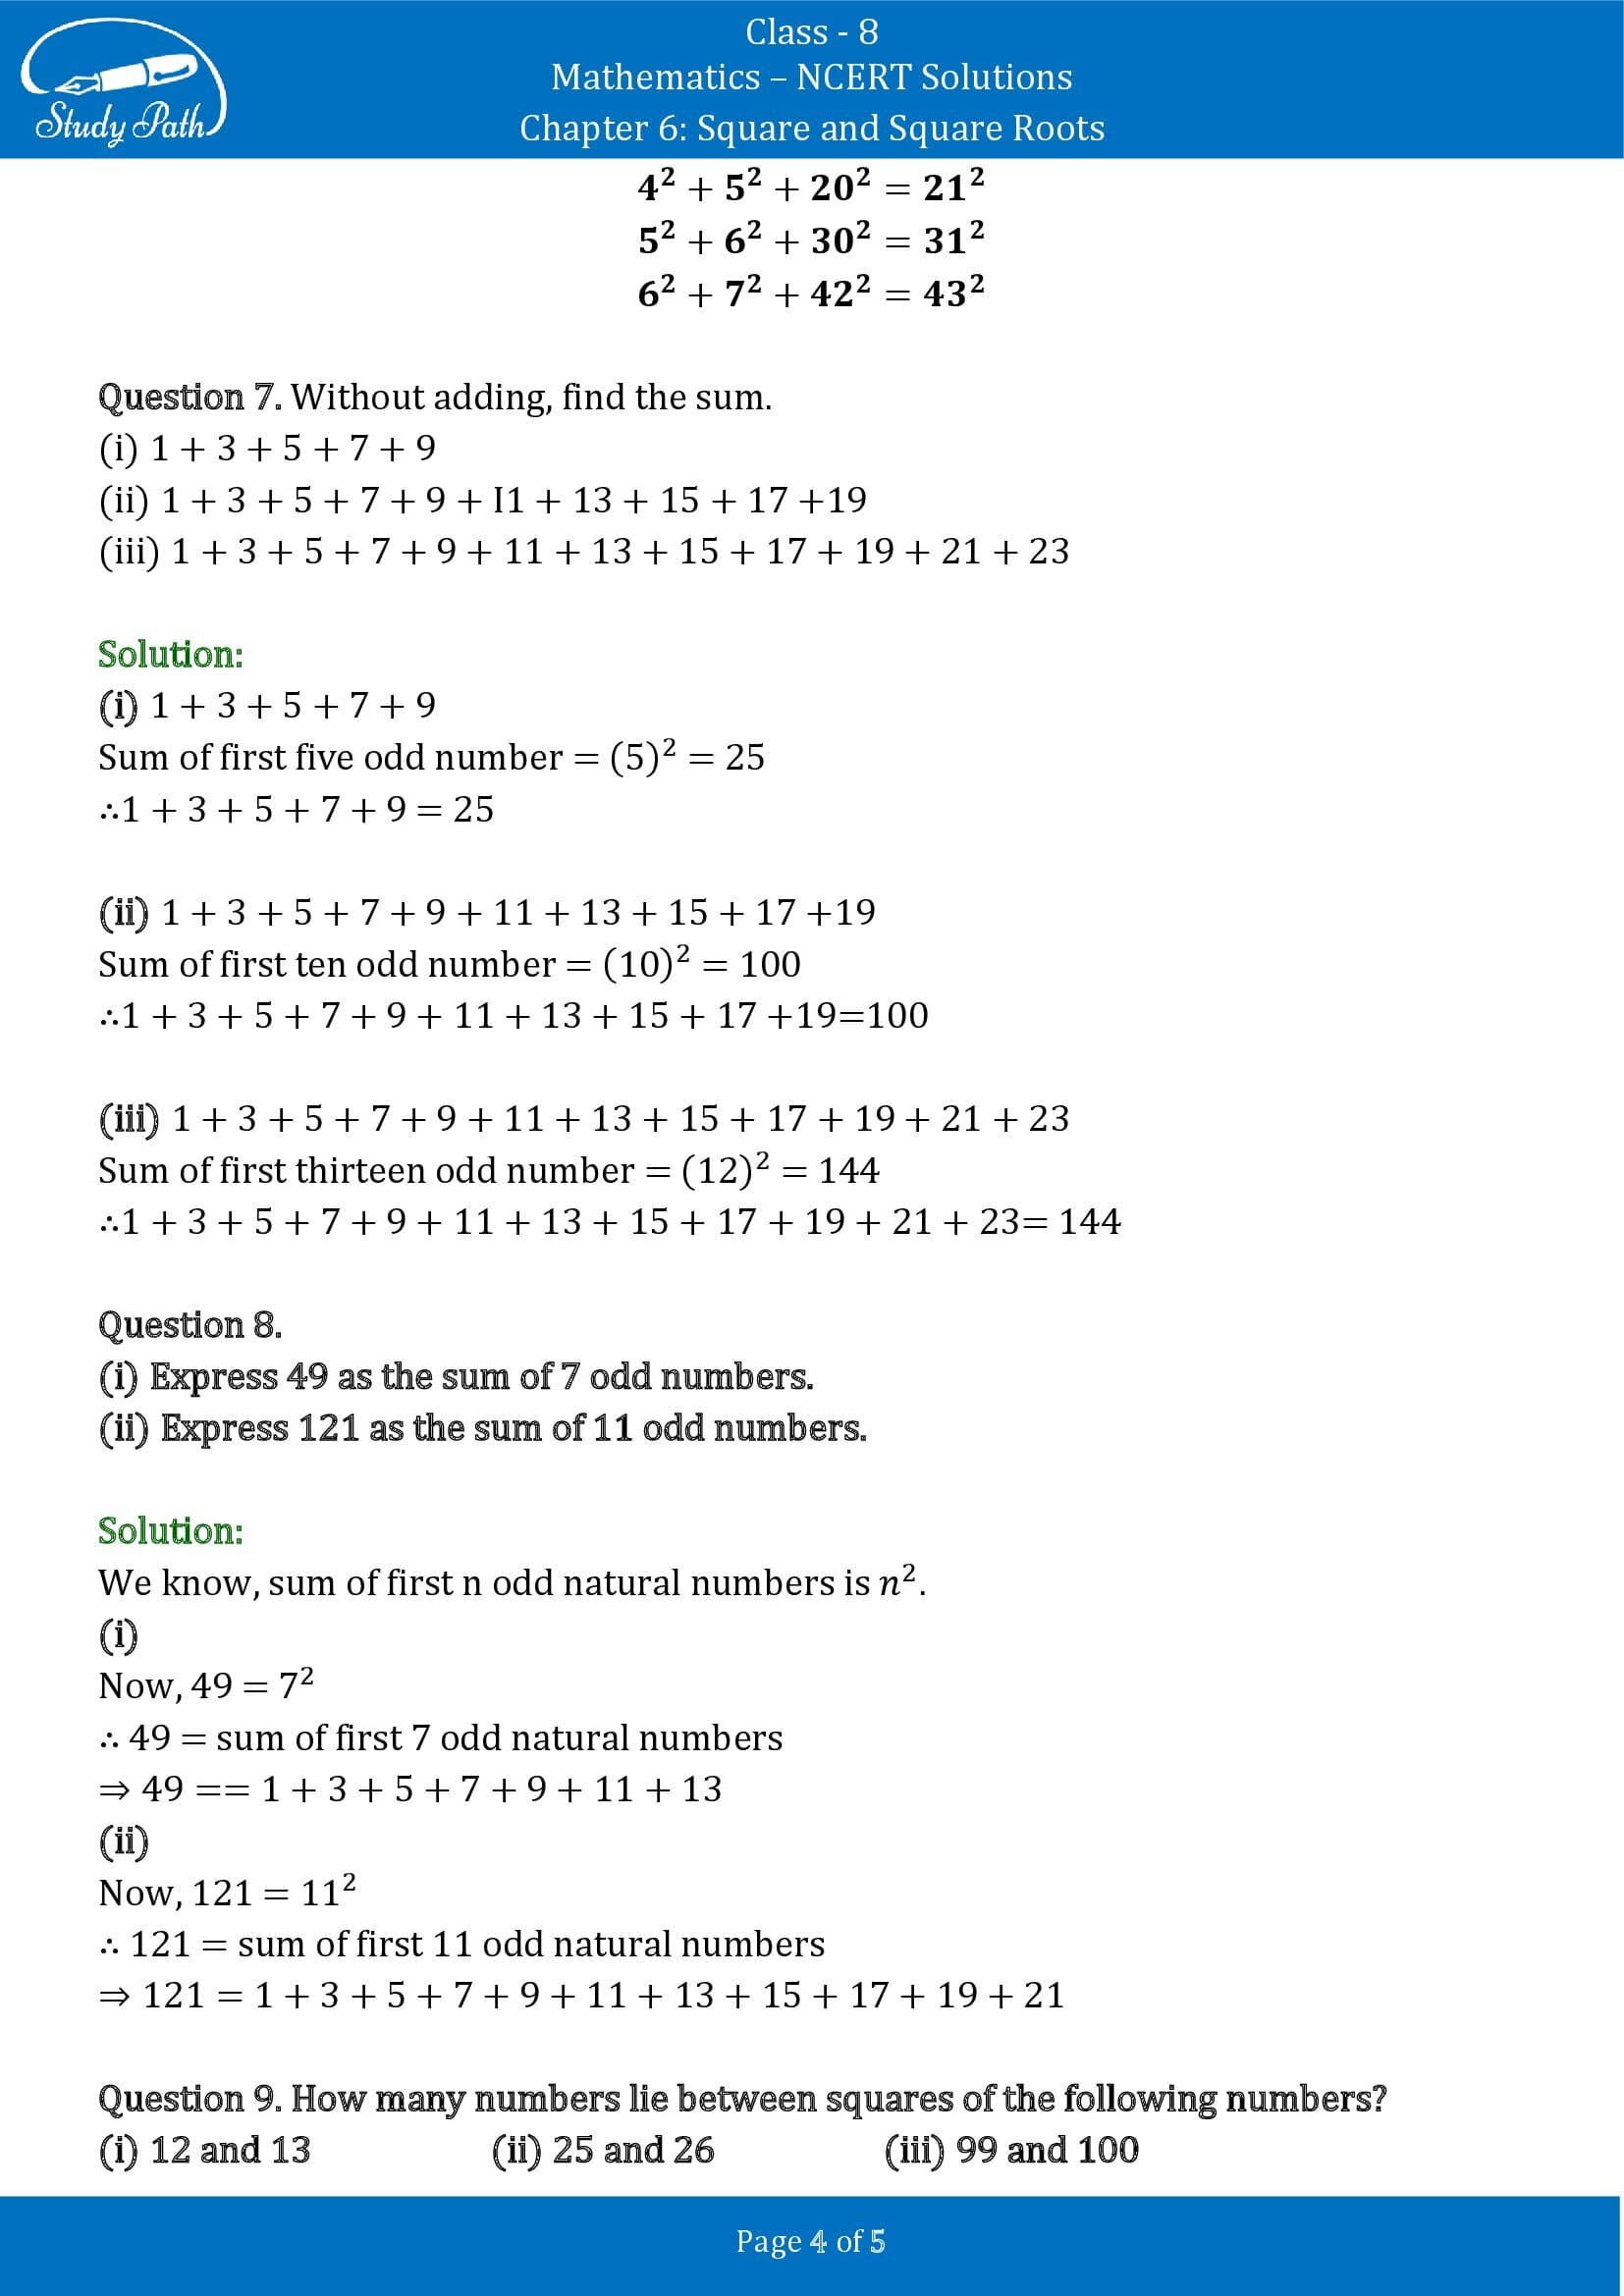 NCERT Solutions for Class 8 Maths Chapter 6 Square and Square Roots Exercise 6.1 00004